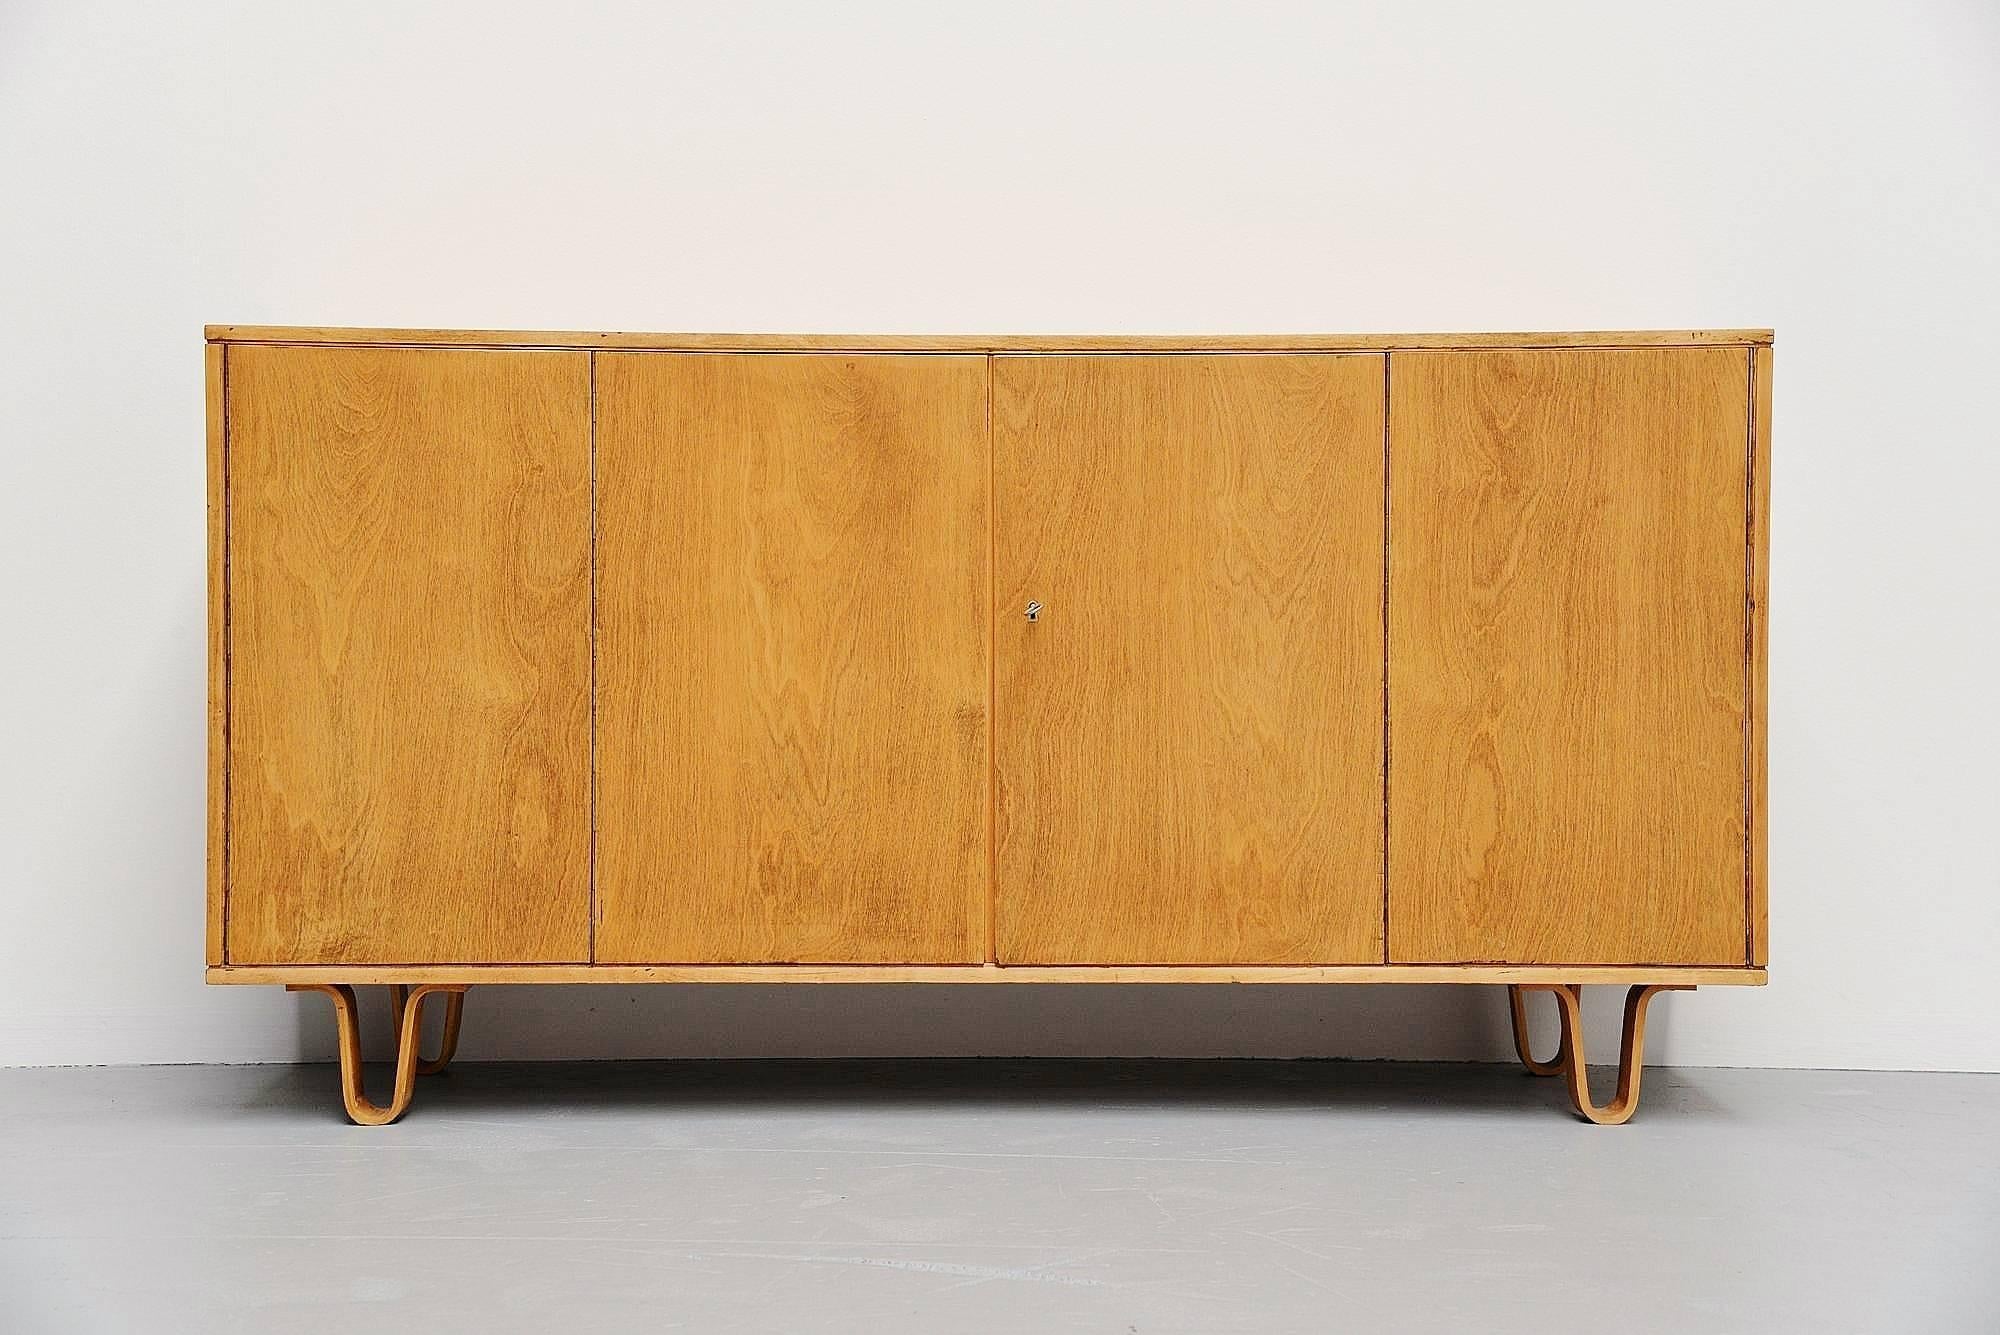 Modernist sideboard model DB02 designed by Cees Braakman, manufactured by Pastoe UMS, Holland, 1952. This sideboard has a double folding door with three shelves and four drawers behind. This sideboard is from the famous birch series by Cees Braakman